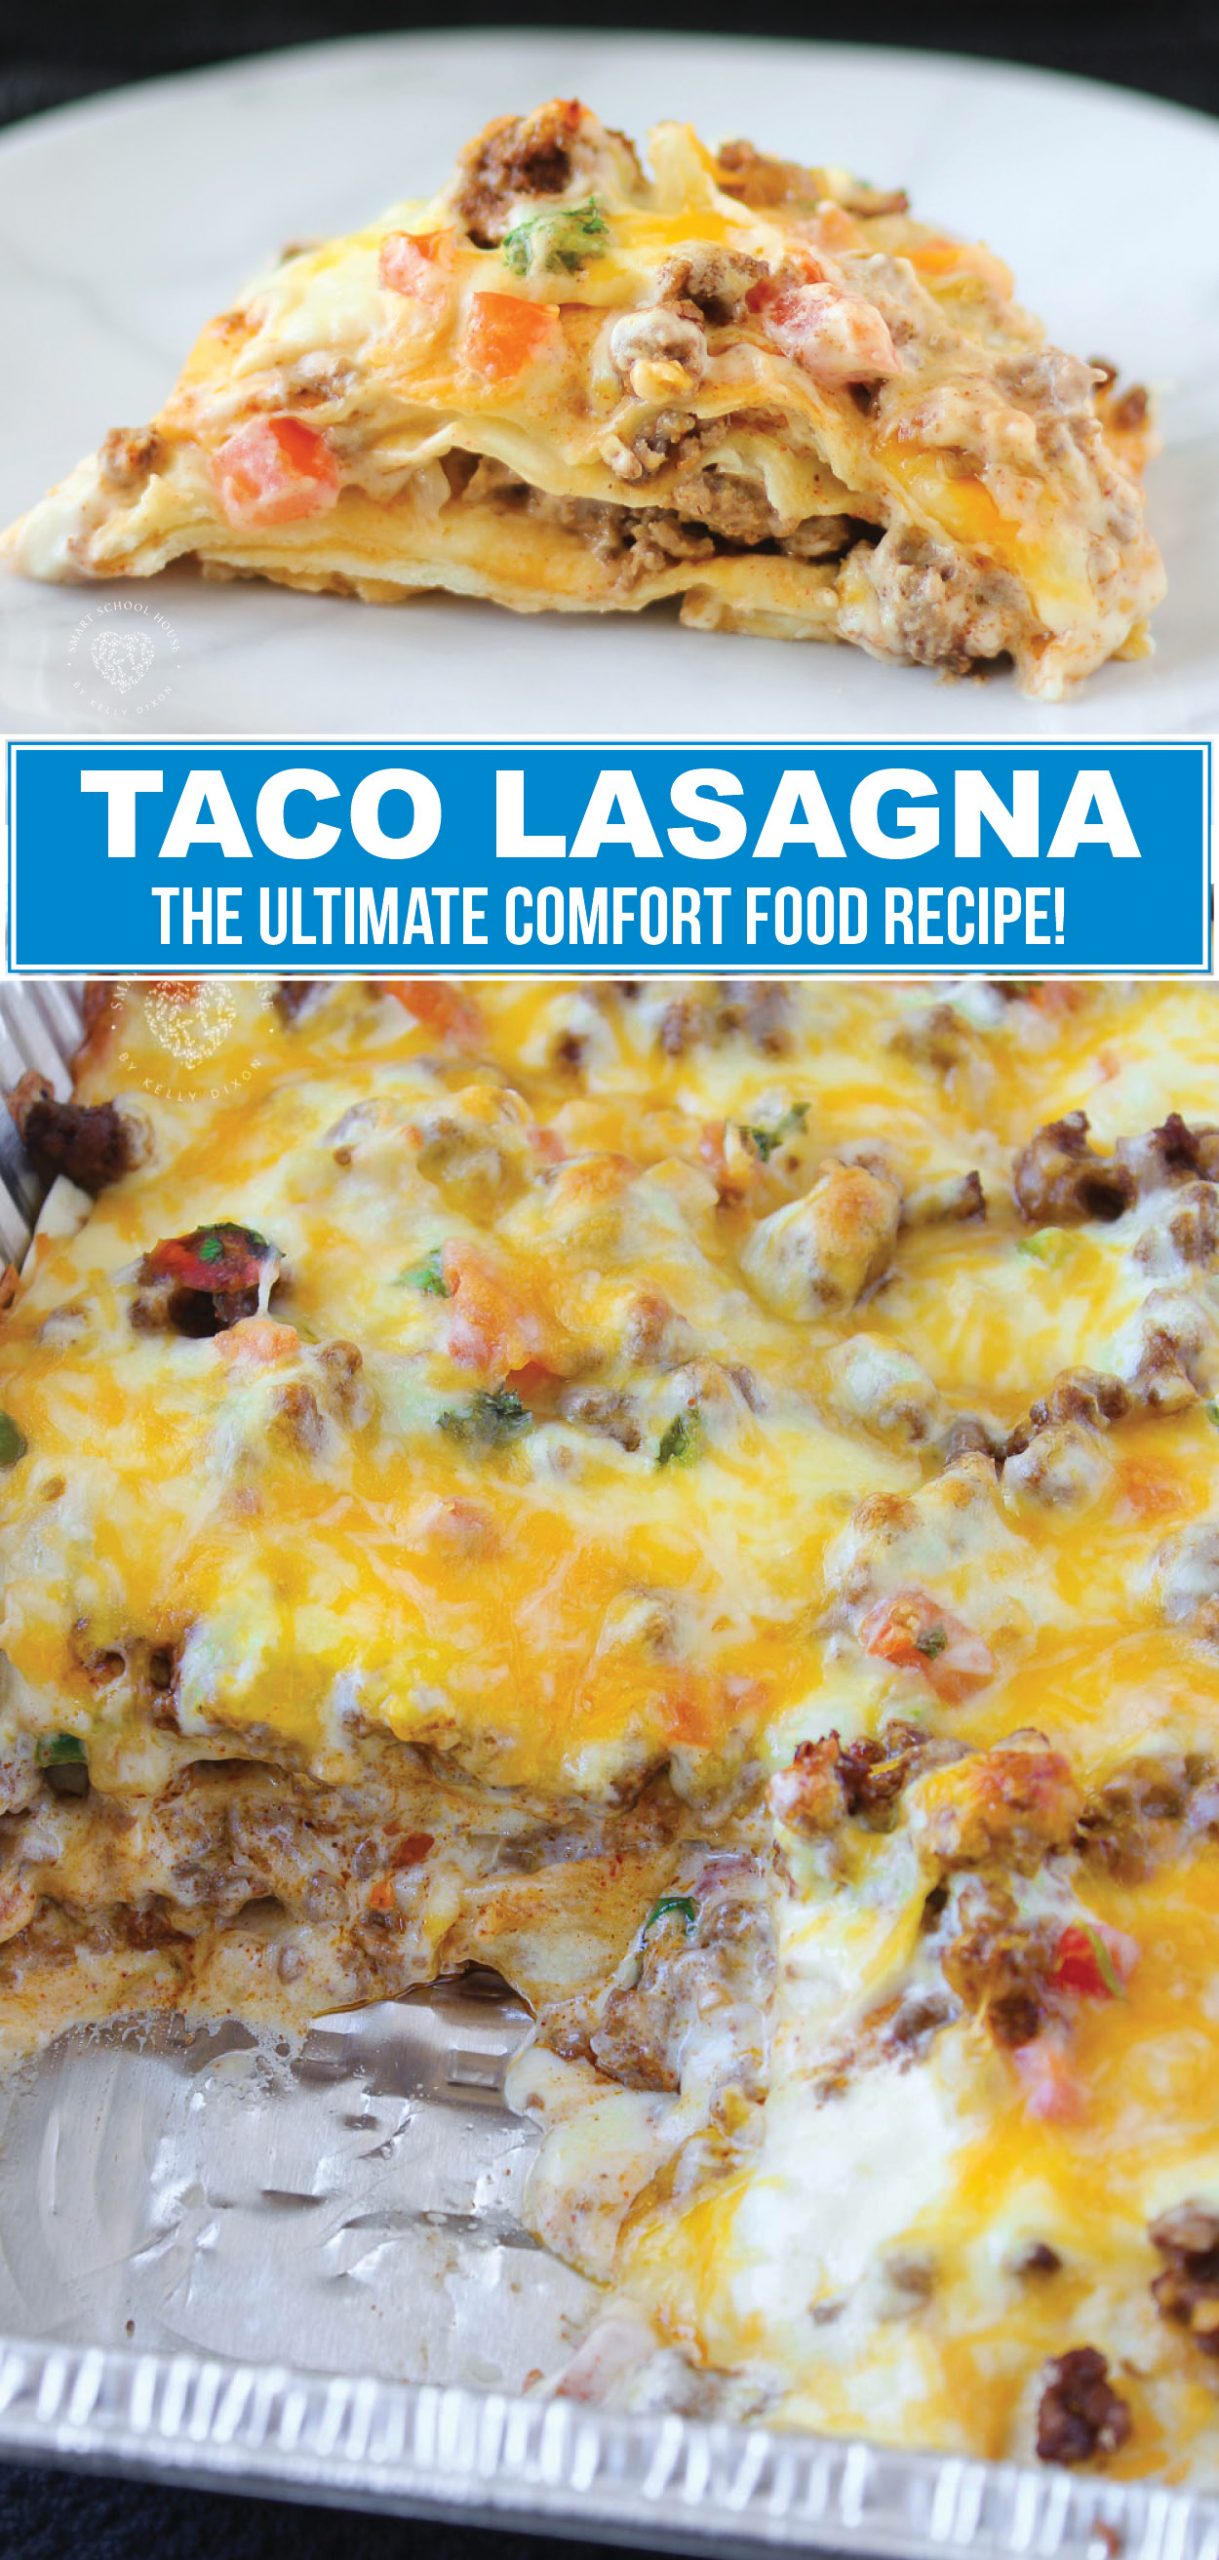 Taco Lasagna is made with soft flour tortillas, seasoned taco ground beef, and pico de gallo. But the cheese is really what makes this Taco Lasagna OVER THE TOP!